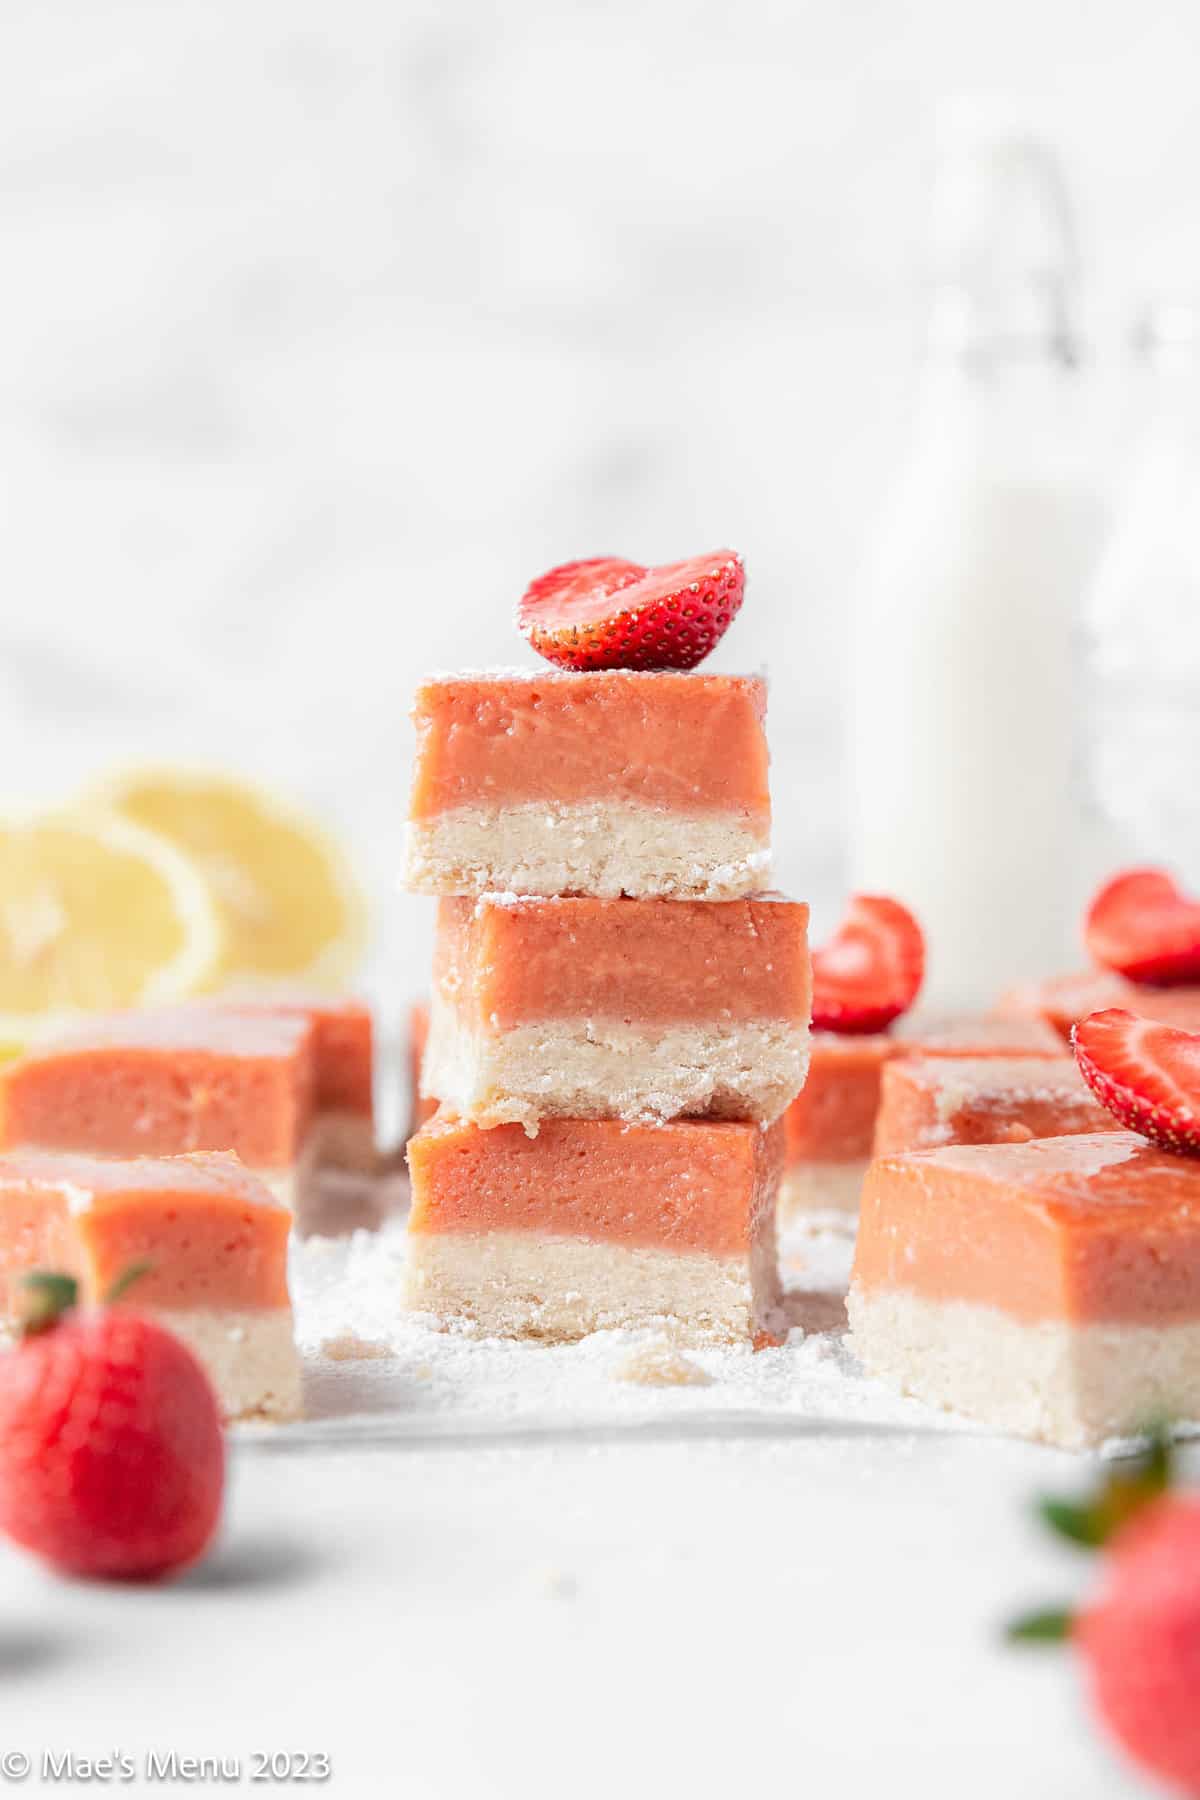 Stacks of strawberry lemonade bars on the counter with lemons, strawberries, and milk.